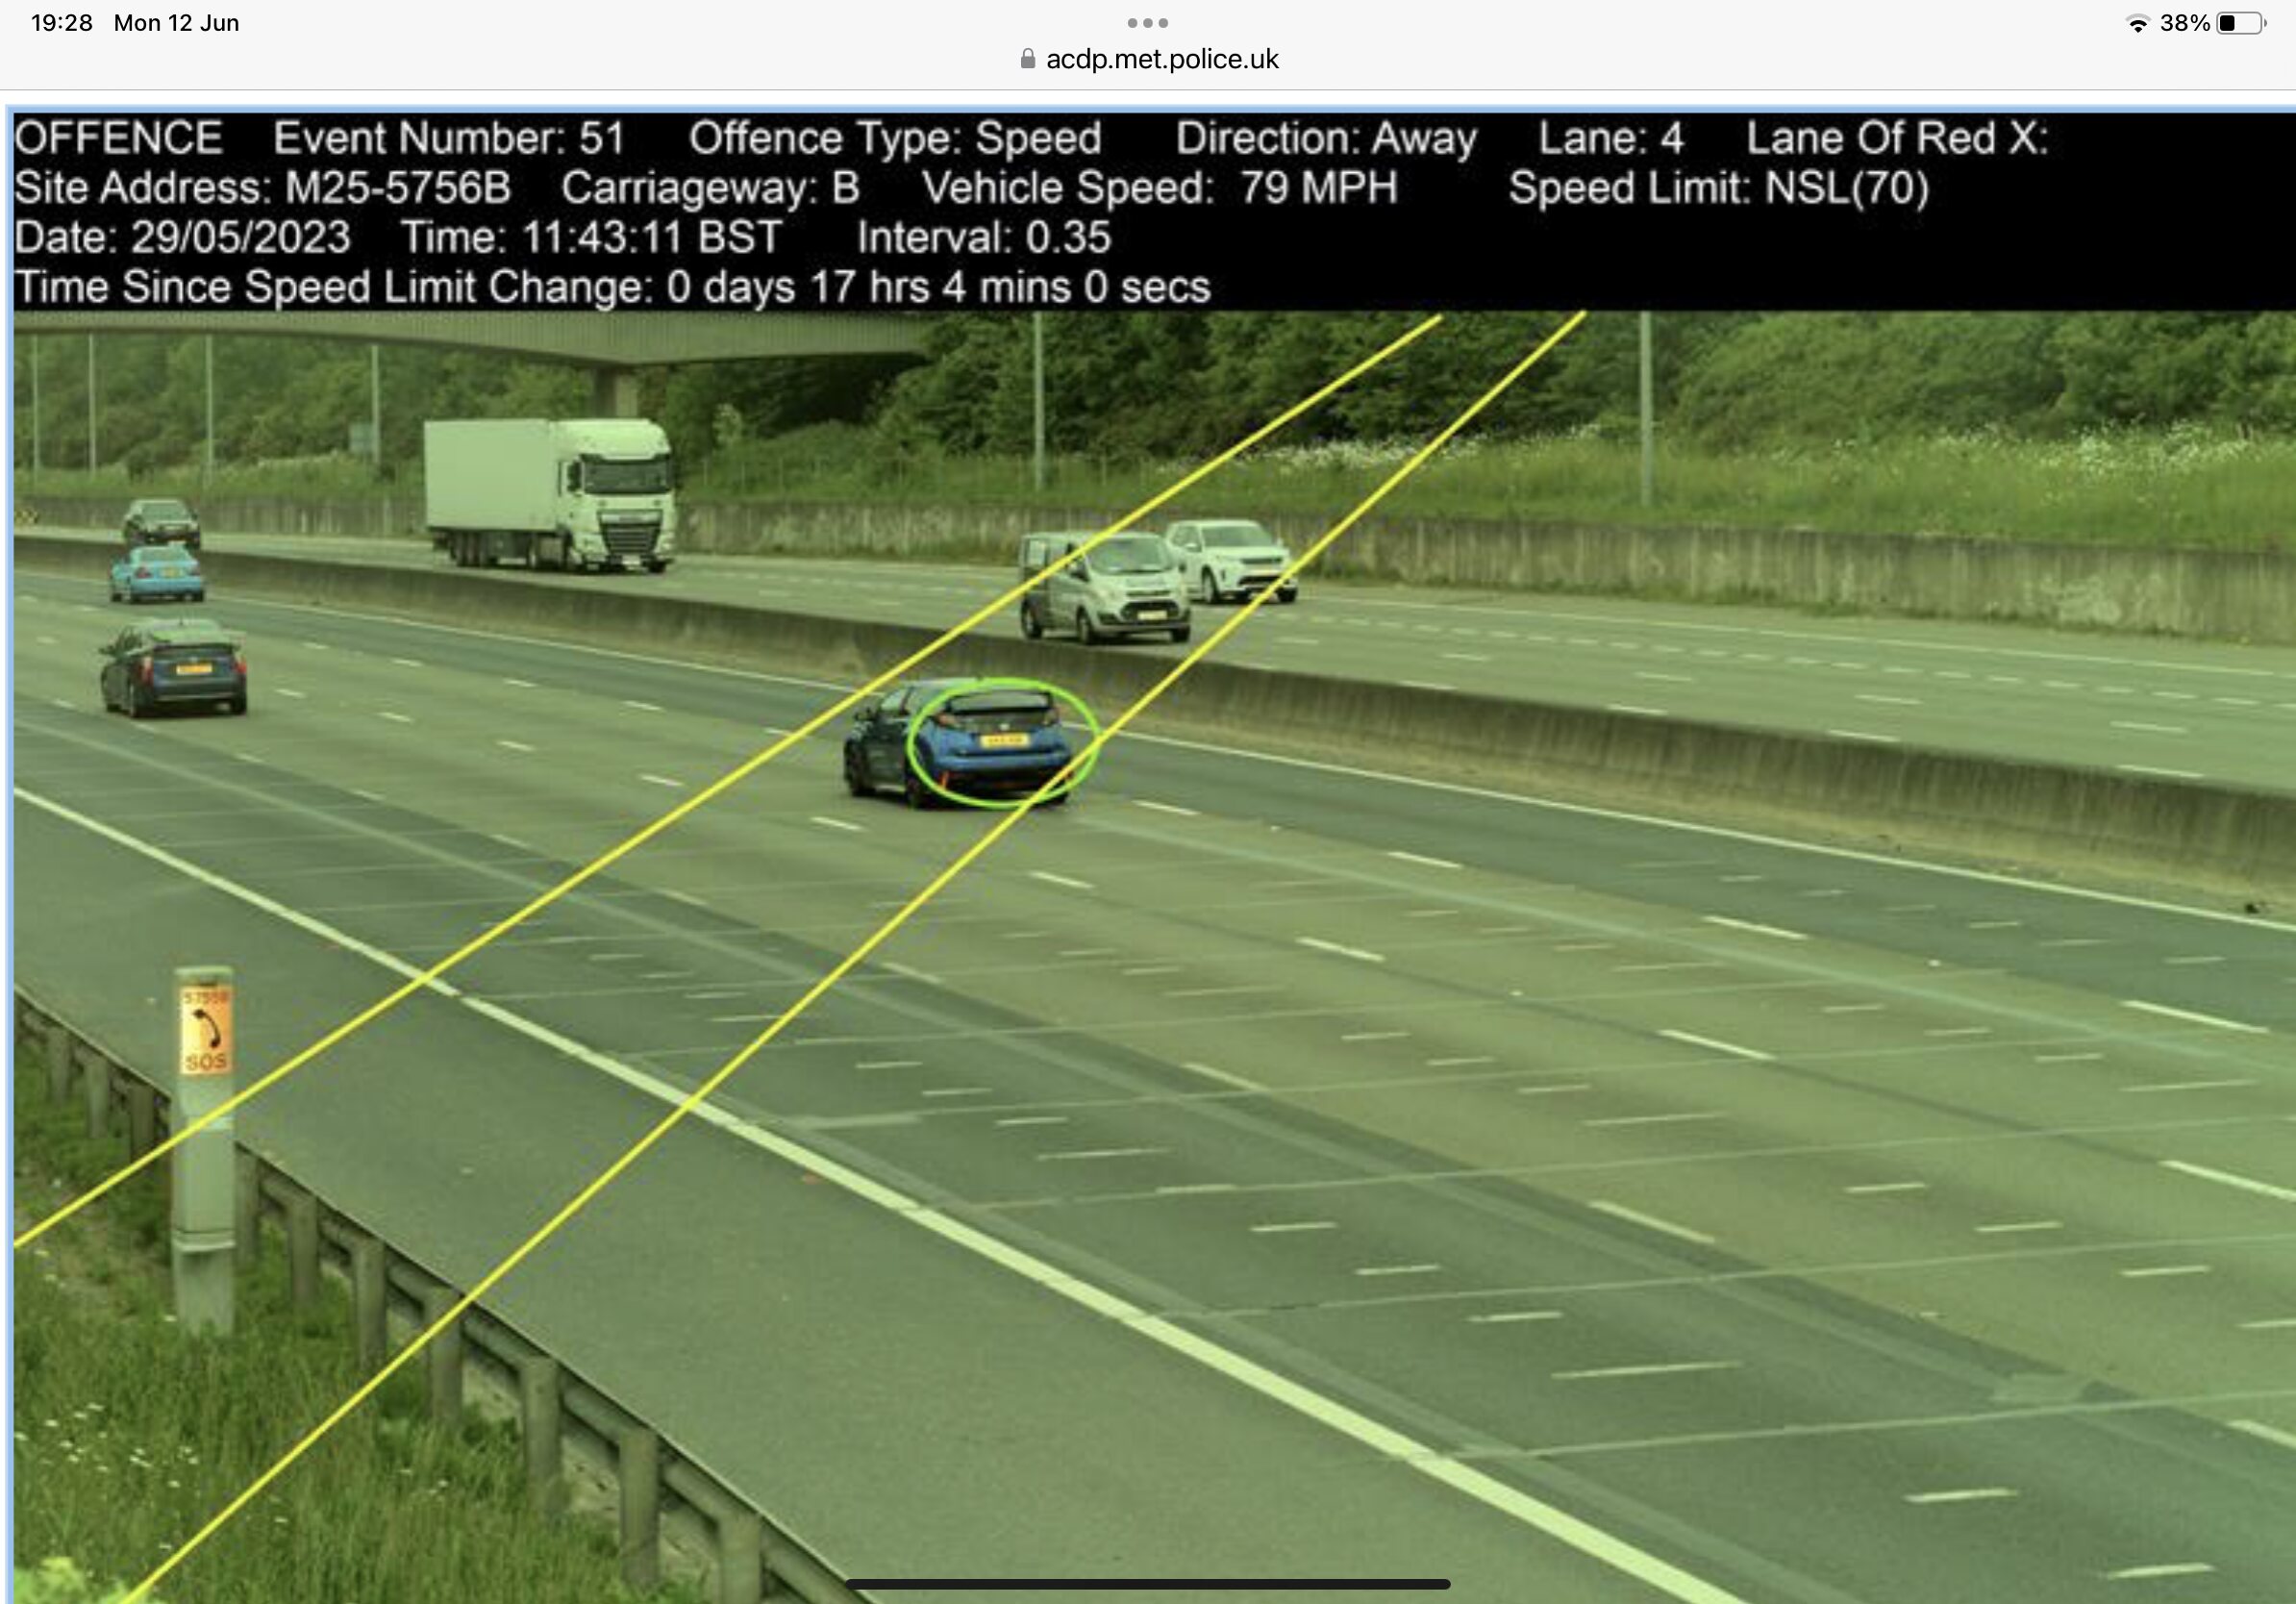 Flashed on the M25 gantry camera - Page 1 - Speed, Plod & the Law - PistonHeads UK - The image shows a computer screen displaying a live traffic camera feed. In the center, there's a vehicle captured in motion on what appears to be an urban highway or city road. The highway is surrounded by grassy areas and some trees. There are also other vehicles visible behind the main subject. On the bottom right corner of the image, there's a red arrow with a black outline, suggesting that the camera is focusing on this vehicle.

The screen has overlaid text, which provides contextual information for viewers. It mentions "Event Number 51", "Type Speed Detection", and "Lane 4 of Red X". Additionally, there's a timestamp showing the date and time as "06/03/2021 18:09:49" and a duration indicating "17 minutes and 16 seconds left until speed changes to 60".

The top right corner of the image shows another vehicle, while the bottom left corner displays a partial view of a roadside sign. The overall style of the image suggests it's a screenshot from a live traffic monitoring system or software interface.